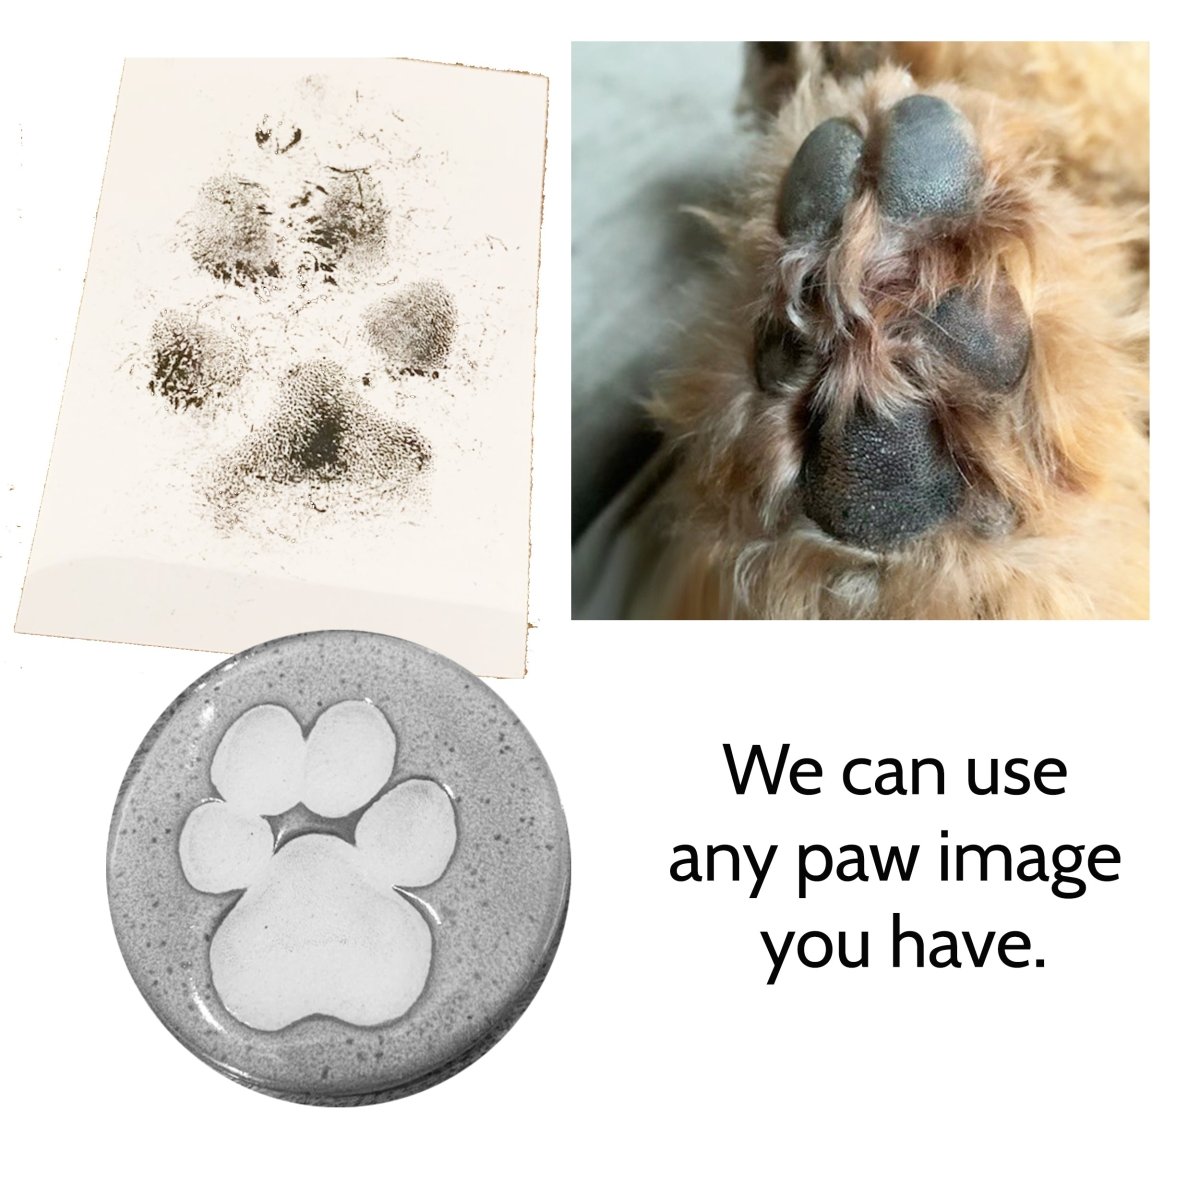 Your Dog's or Cat's Paw Print 16mm Edged Charm in Solid Gold - Luxe Design Jewellery